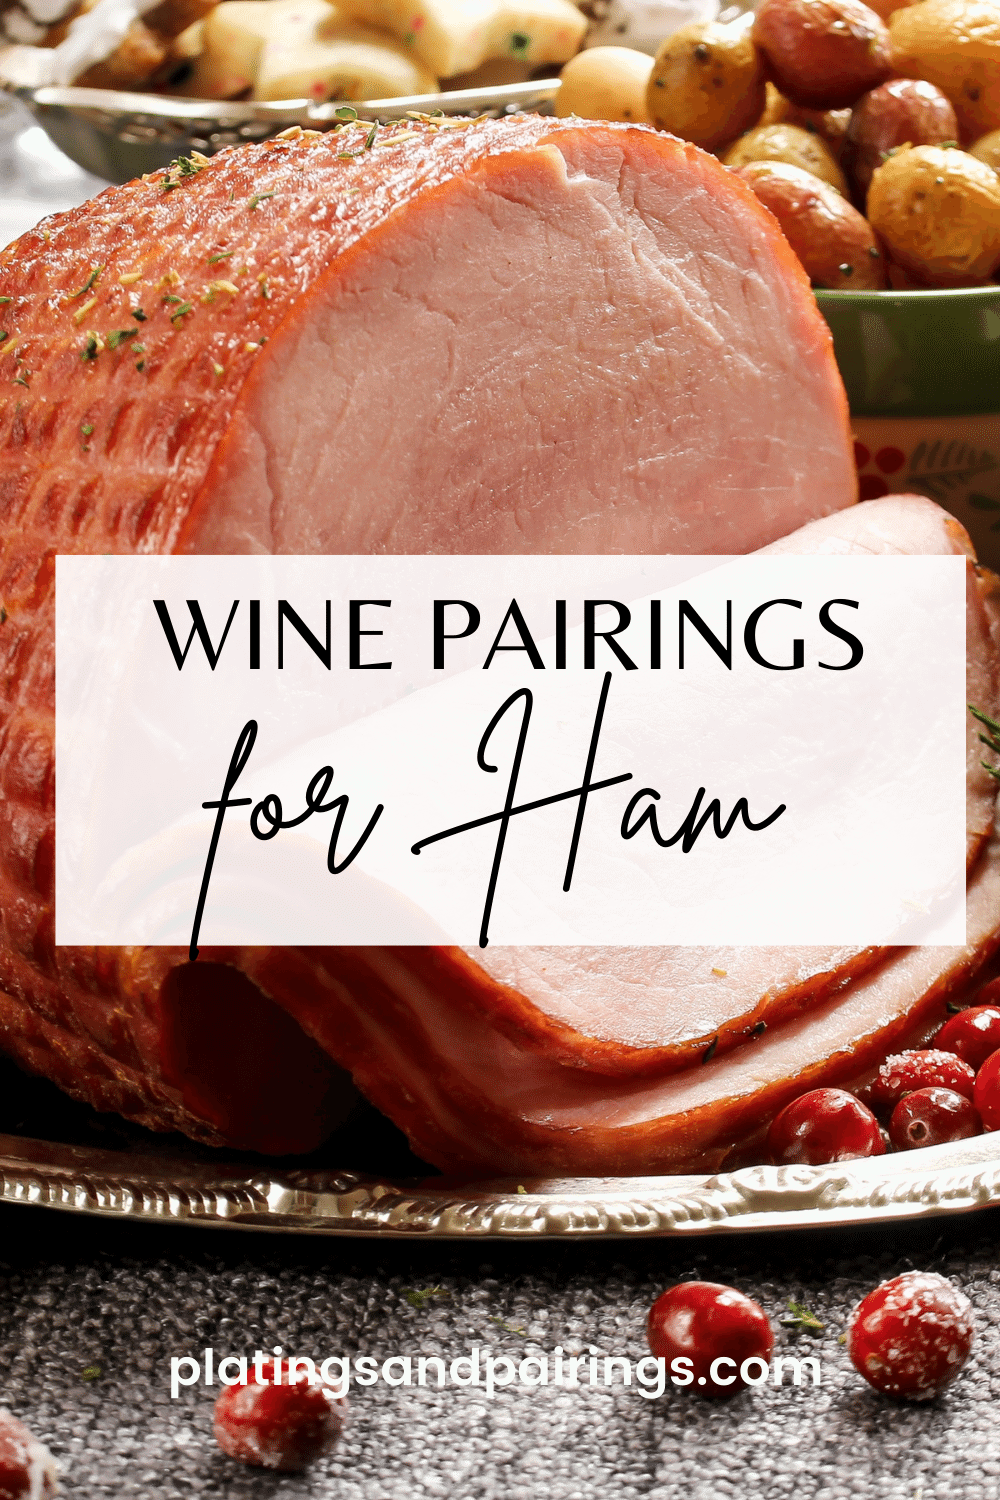 PICTURE OF HAM WITH TEXT OVERLAY.